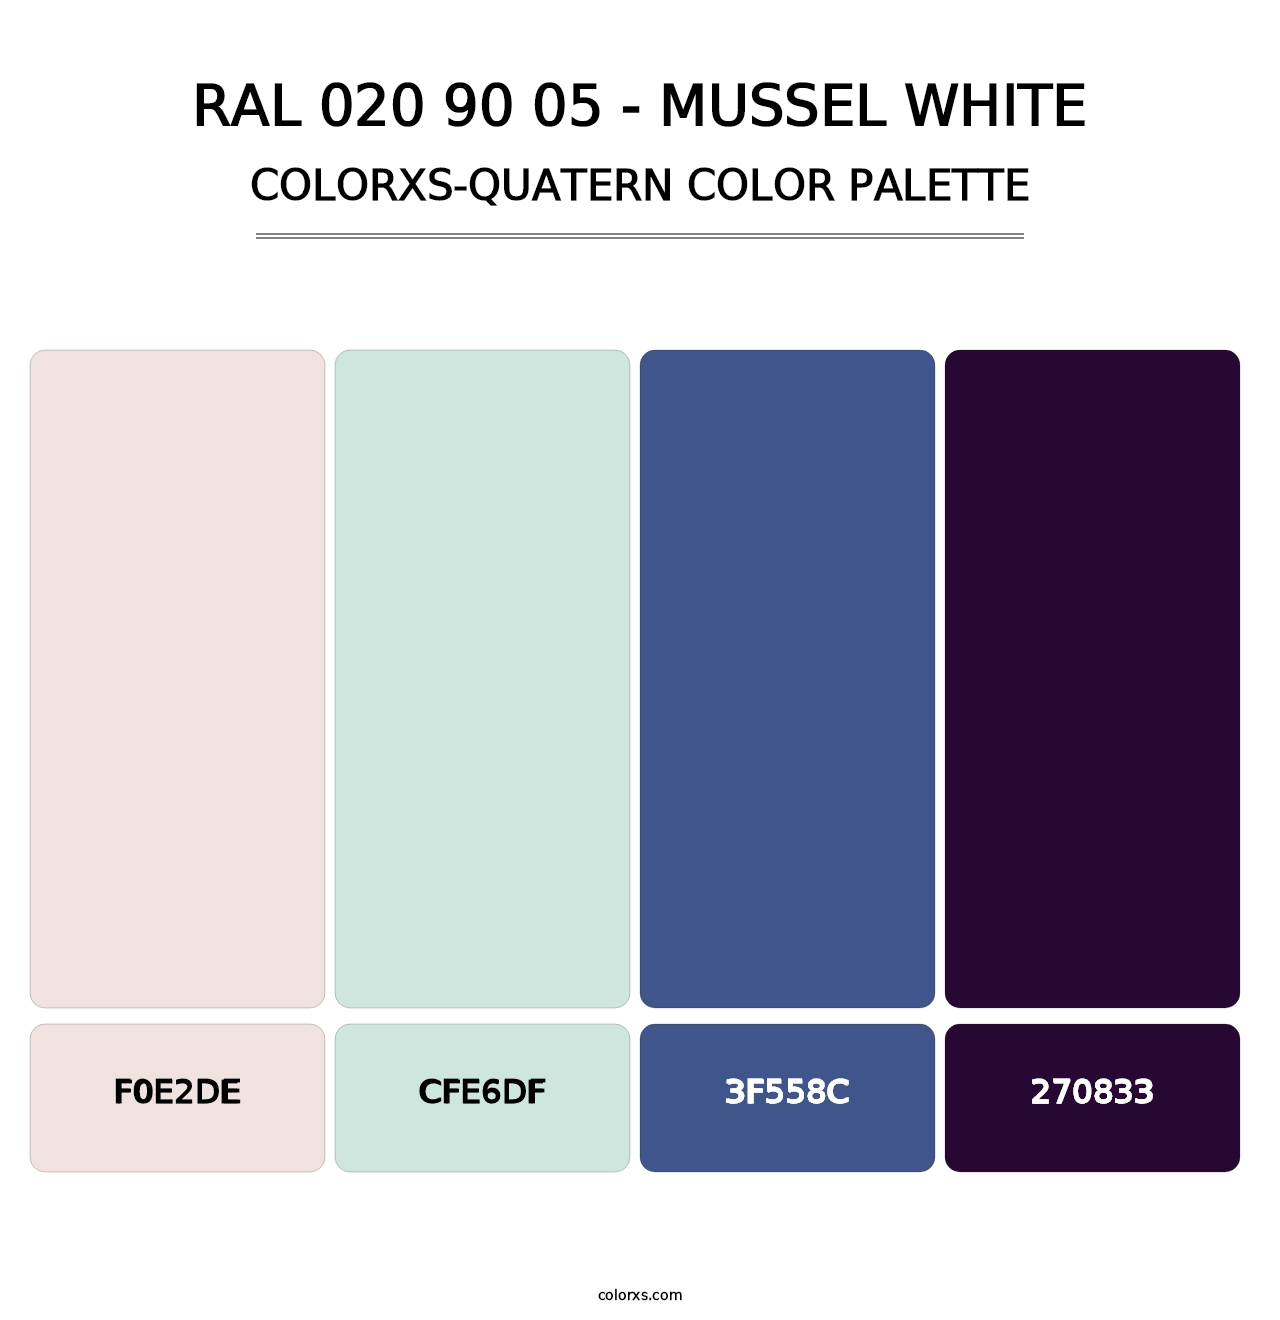 RAL 020 90 05 - Mussel White - Colorxs Quatern Palette